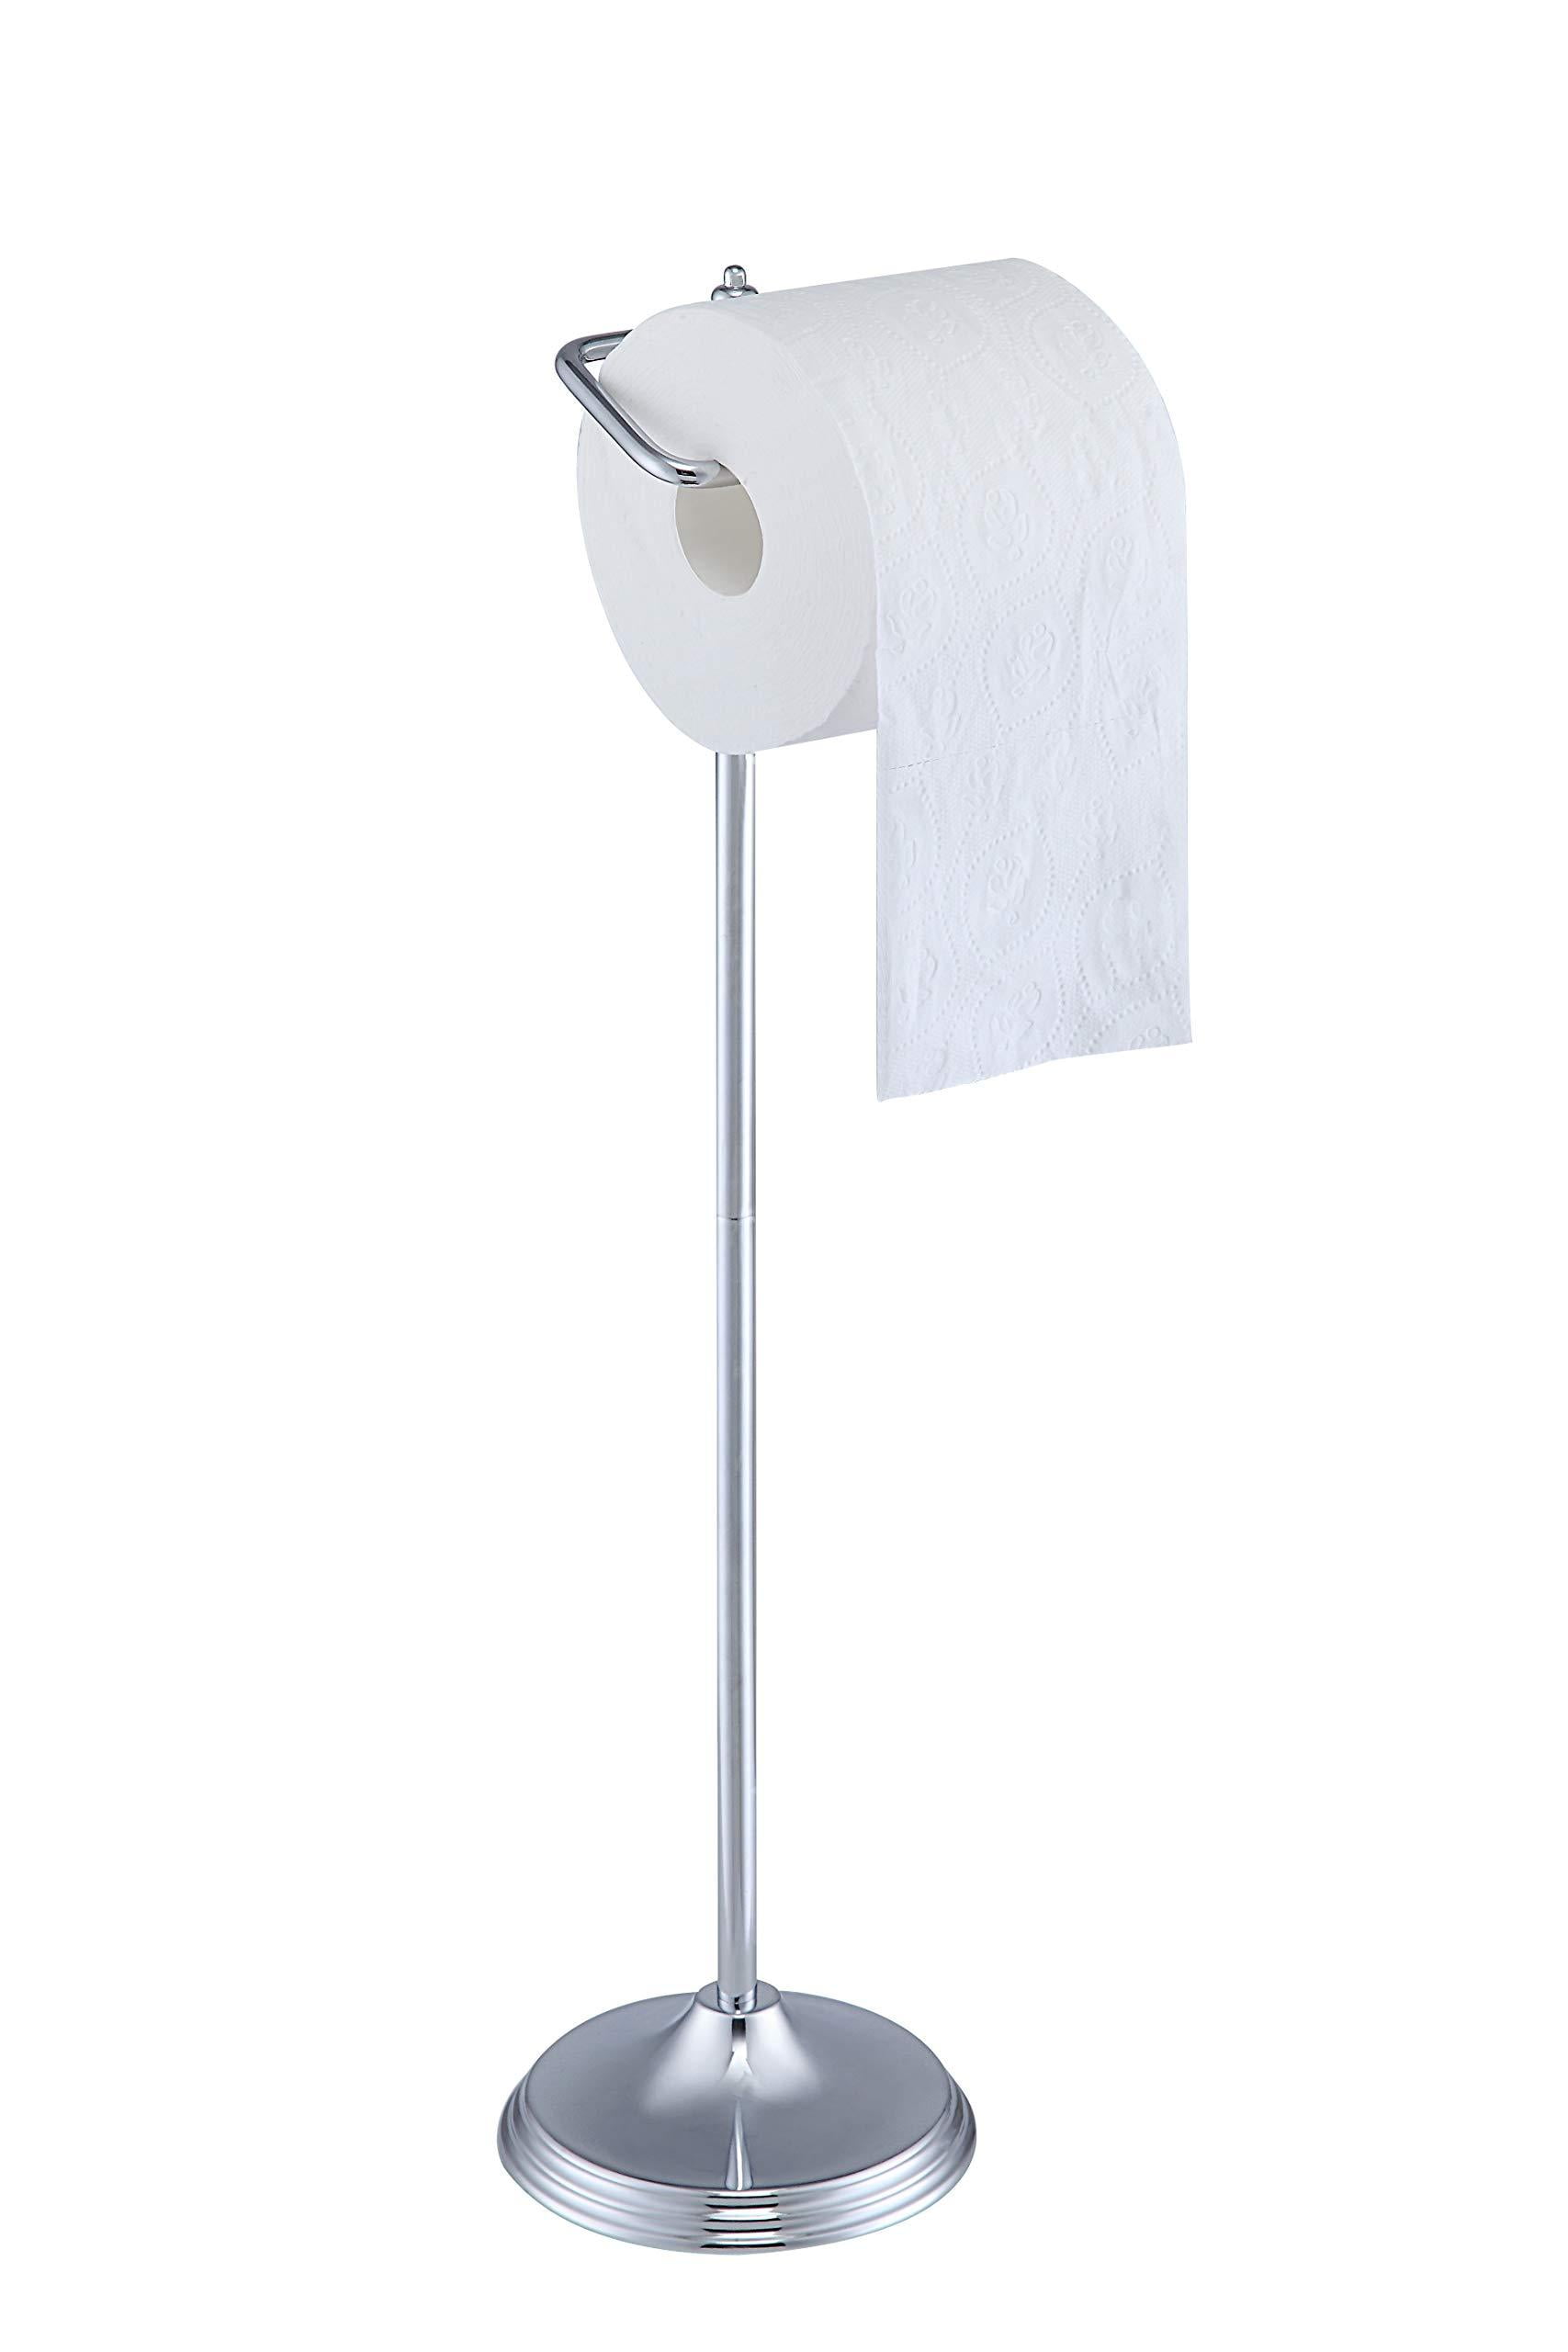 SunnyPoint Free Standing Toilet Paper Holder Stand with Reserve; Brush Nickel, Size: 25.98 x 7.00 x 6.42, Silver